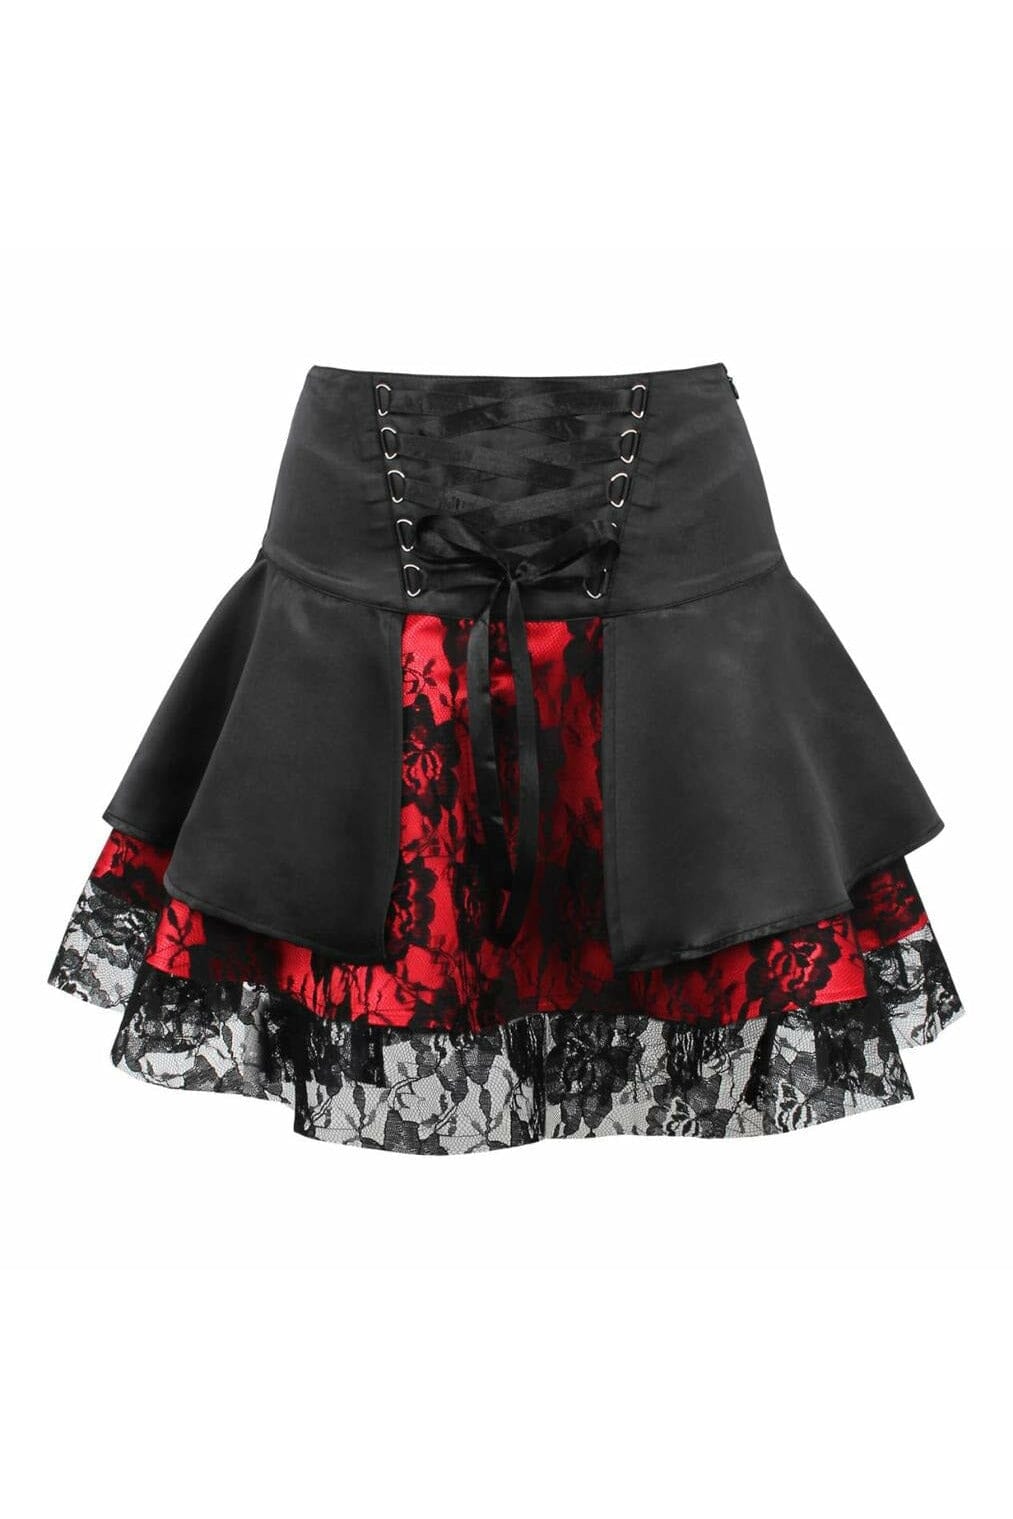 Red w/Black Lace Gothic Skirt-Costume Skirts-Daisy Corsets-Red-XS-SEXYSHOES.COM